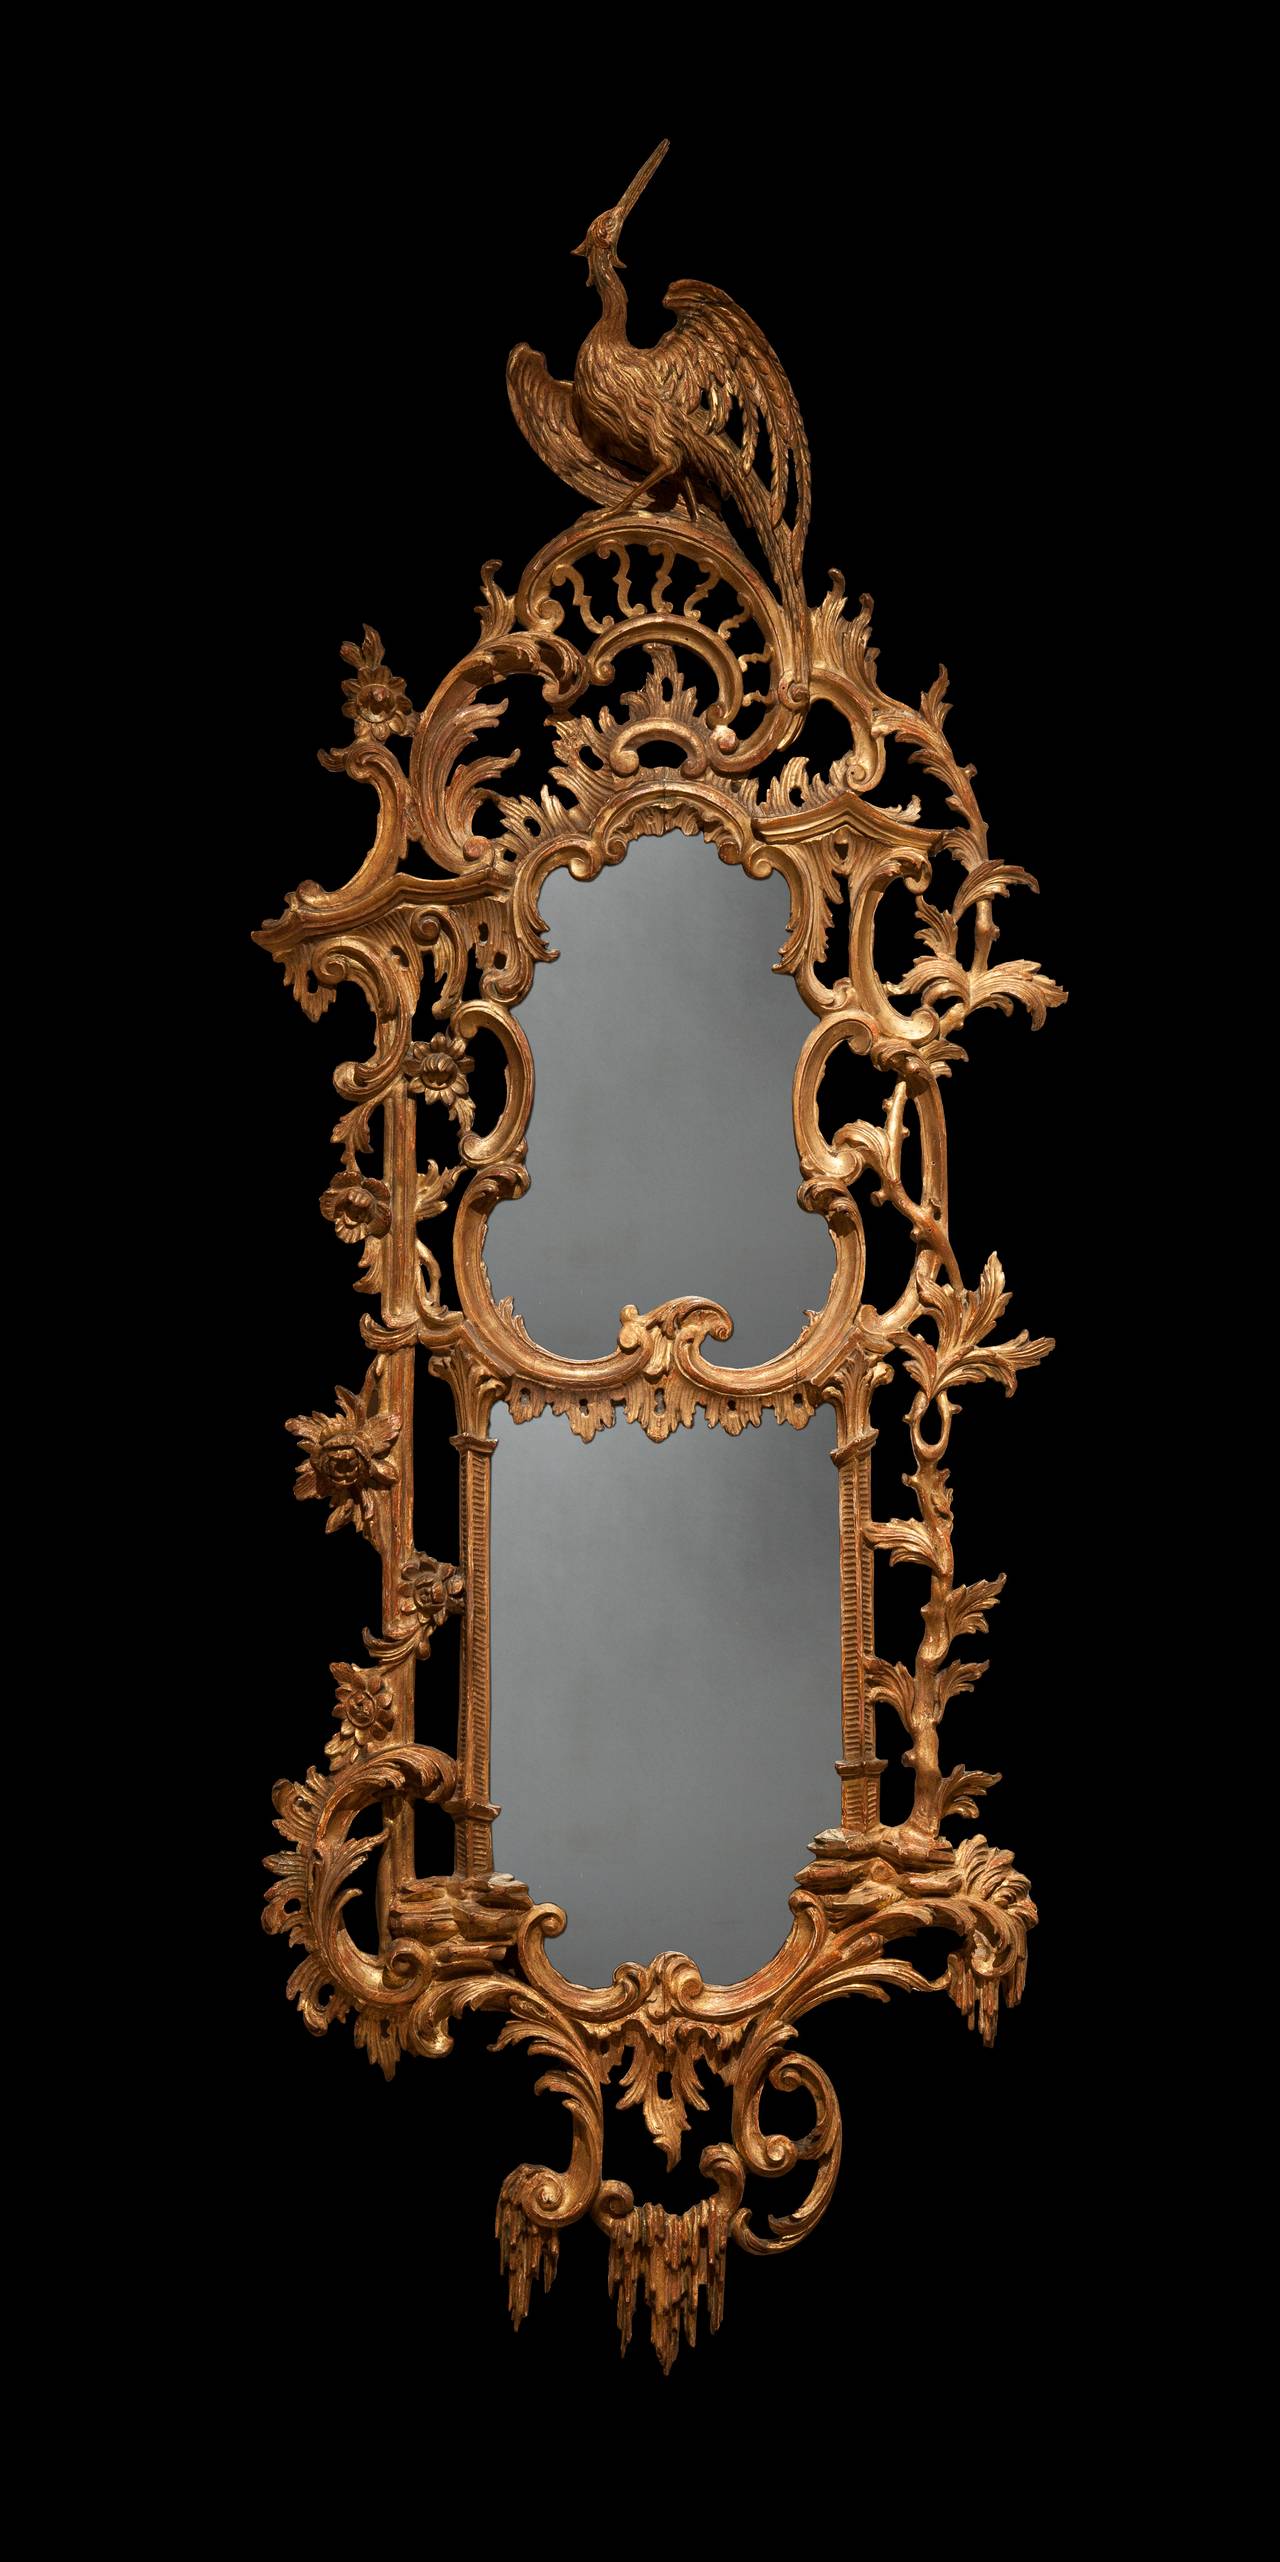 A Pair of Giltwood Mirrors In the Manner of Thomas Chippendale

Constructed in carved gilt wood, the frames, of asymmetrical form, the carving incorporating ‘C’ scrolls, tree trunks, icicles cascades, and surmounted by addorsed ‘Ho-Ho’ birds